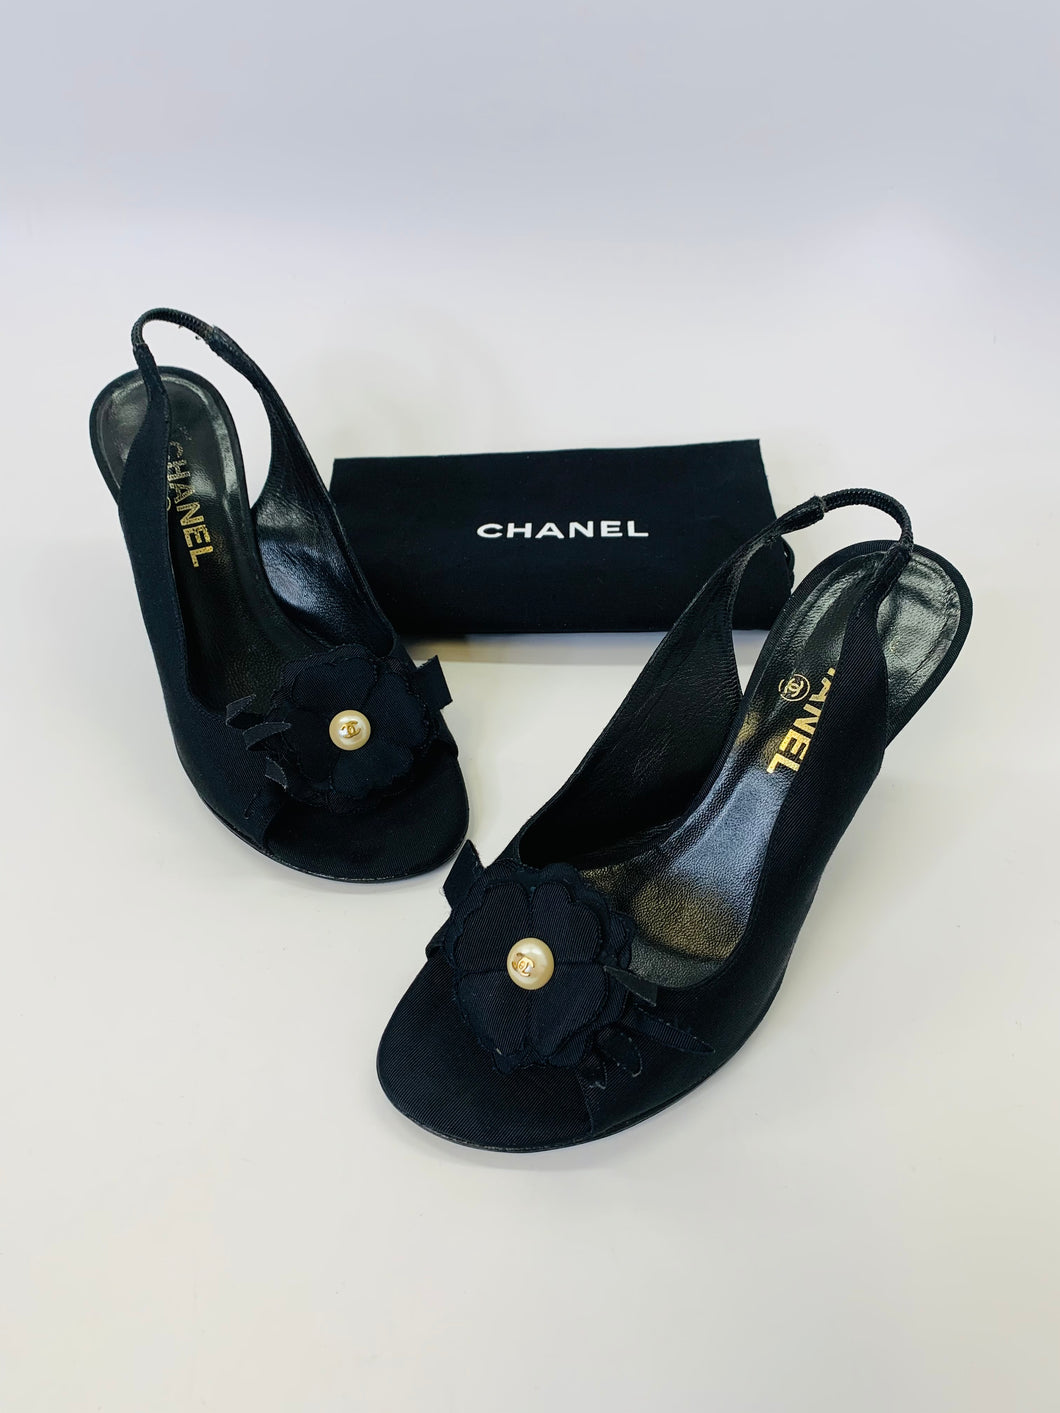 CHANEL Black Grosgrain and Pearl Sandals Size 38 1/2